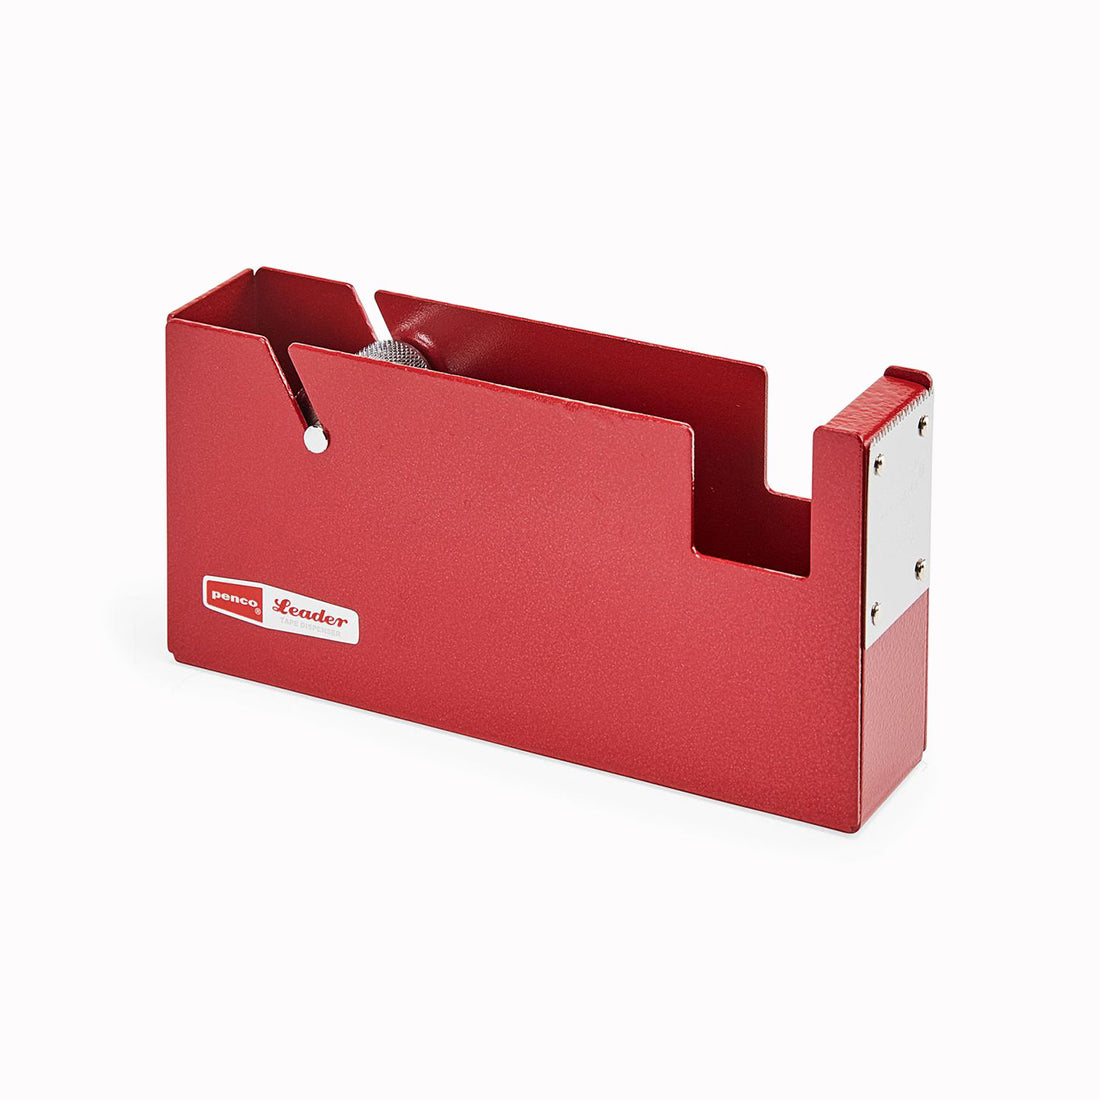 Penco heavyweight metal tape dispenser in red, designed to fit large tape rolls. Extremely sturdy, the dispenser can be wall mounted or used free standing on your desk.